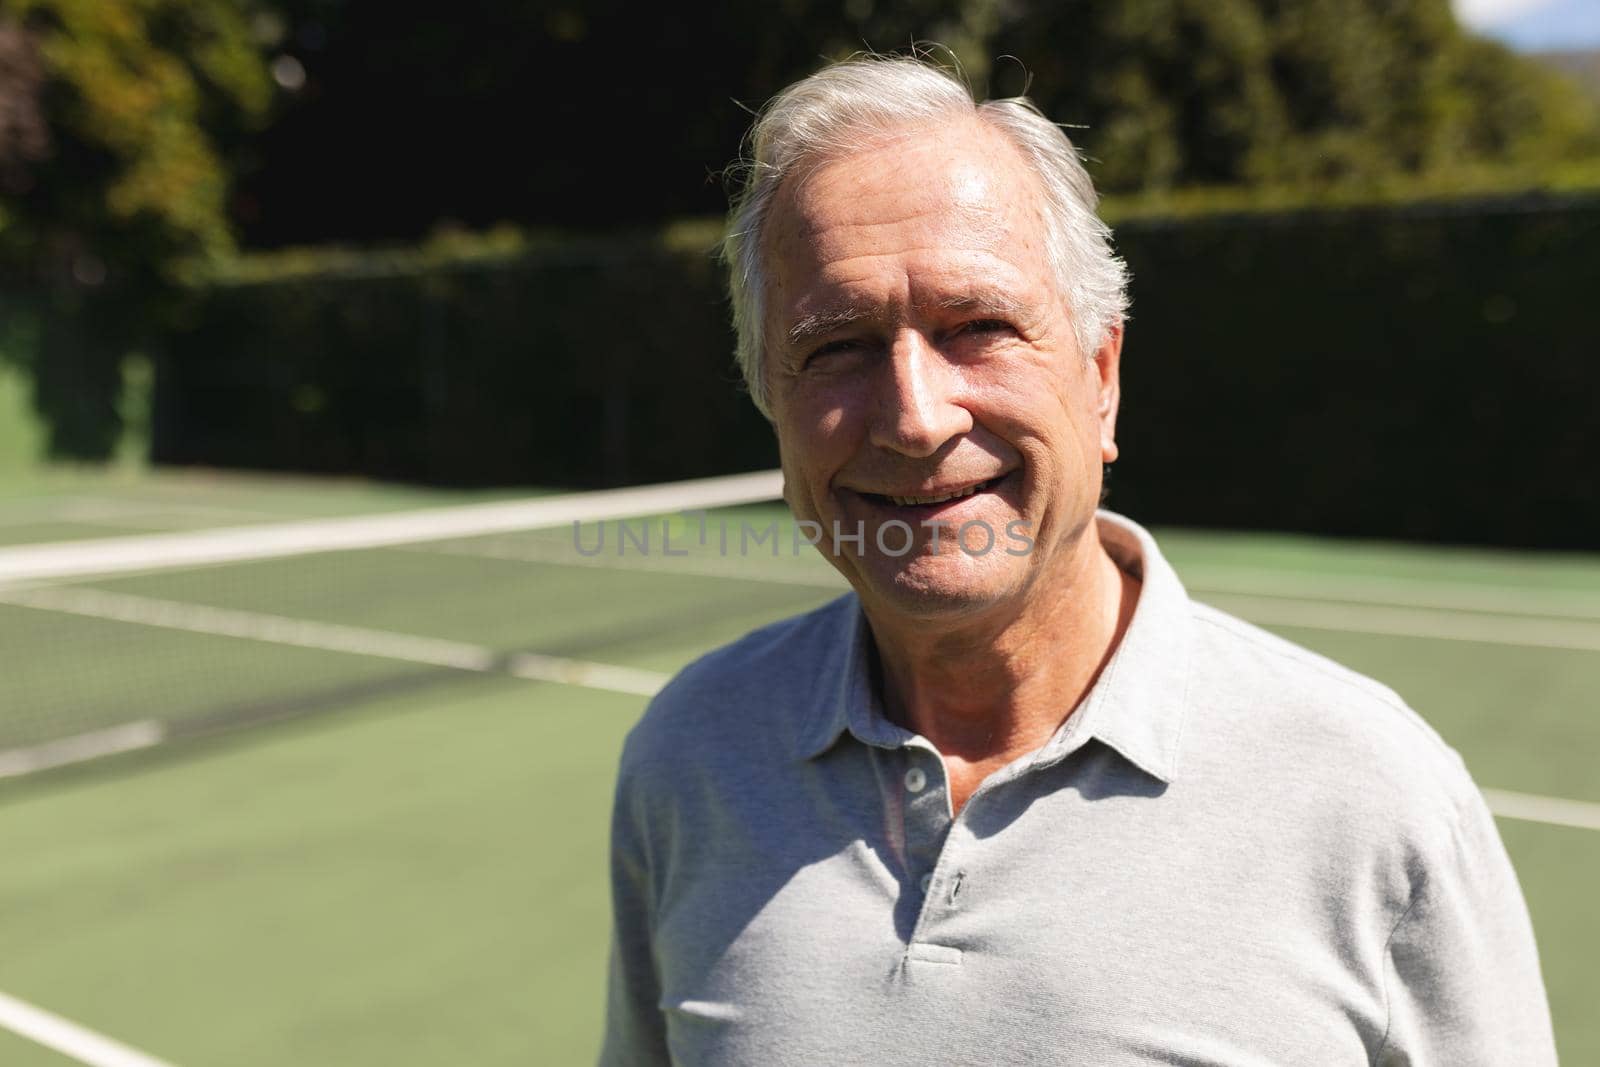 Portrait of senior caucasian man looking at camera and smiling on tennis court by Wavebreakmedia